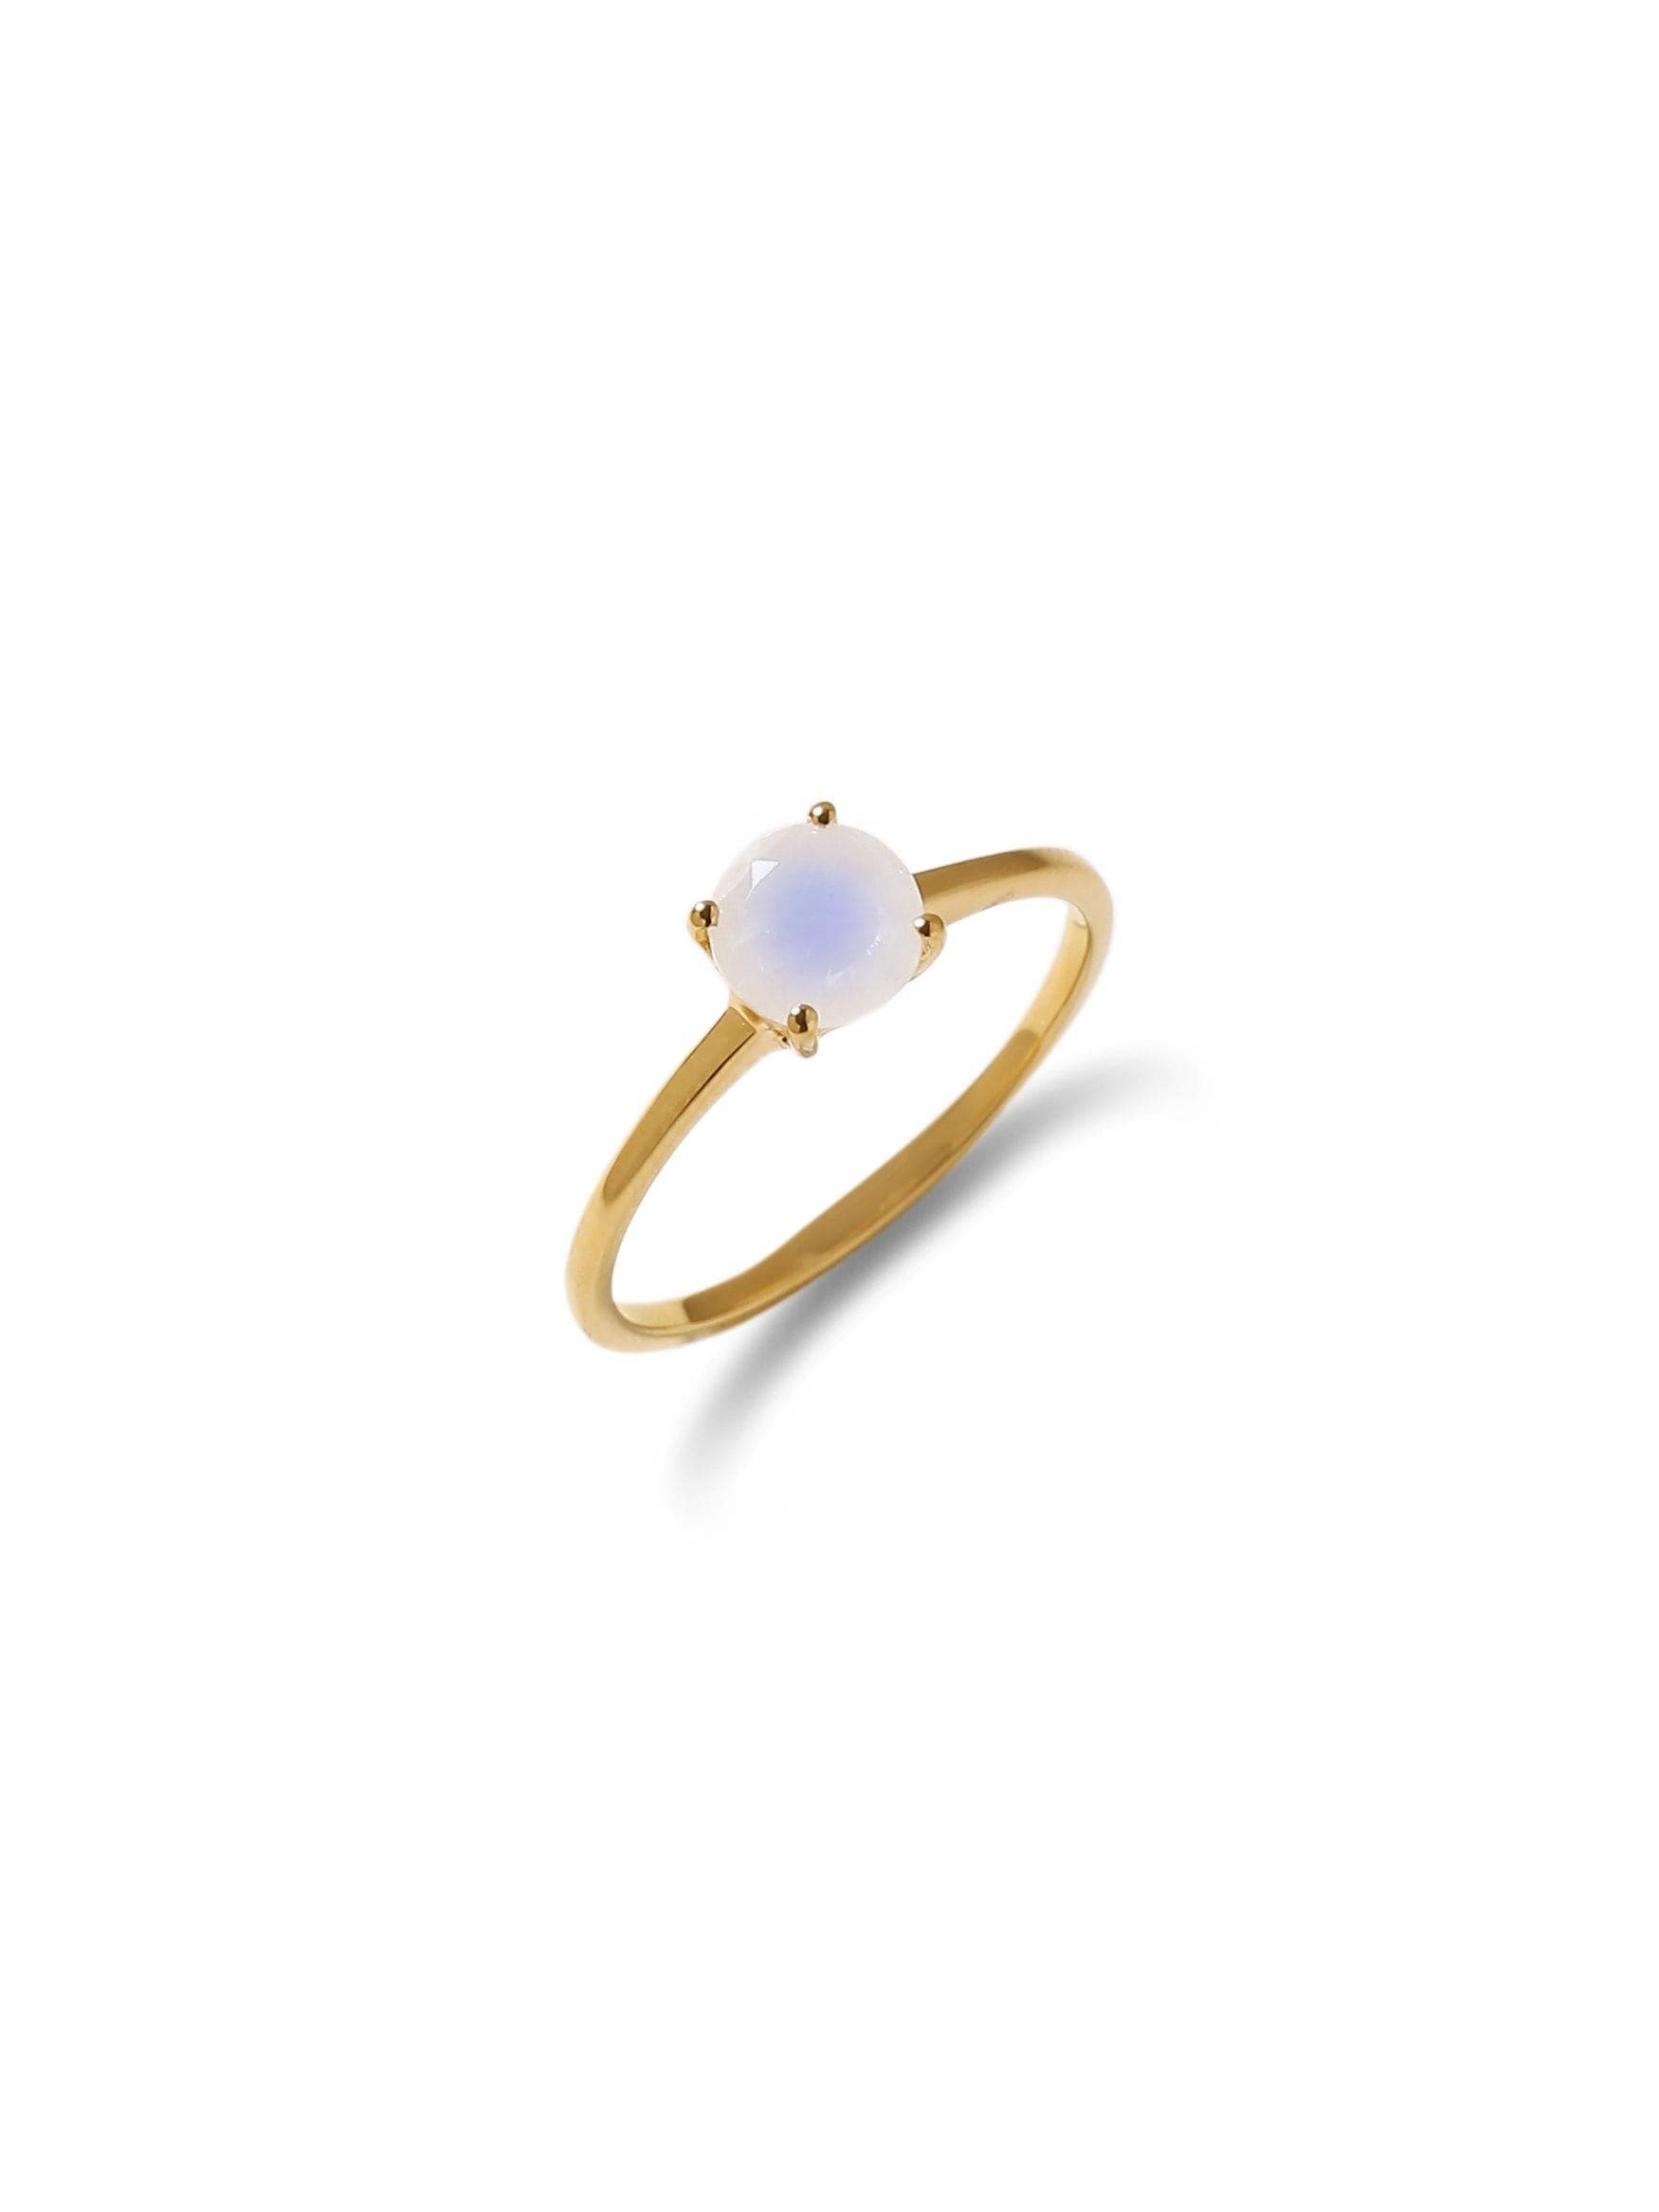 0.60 Ct Moonstone Solid 10k Yellow Gold Solitaire Ring Jewelry - YoTreasure